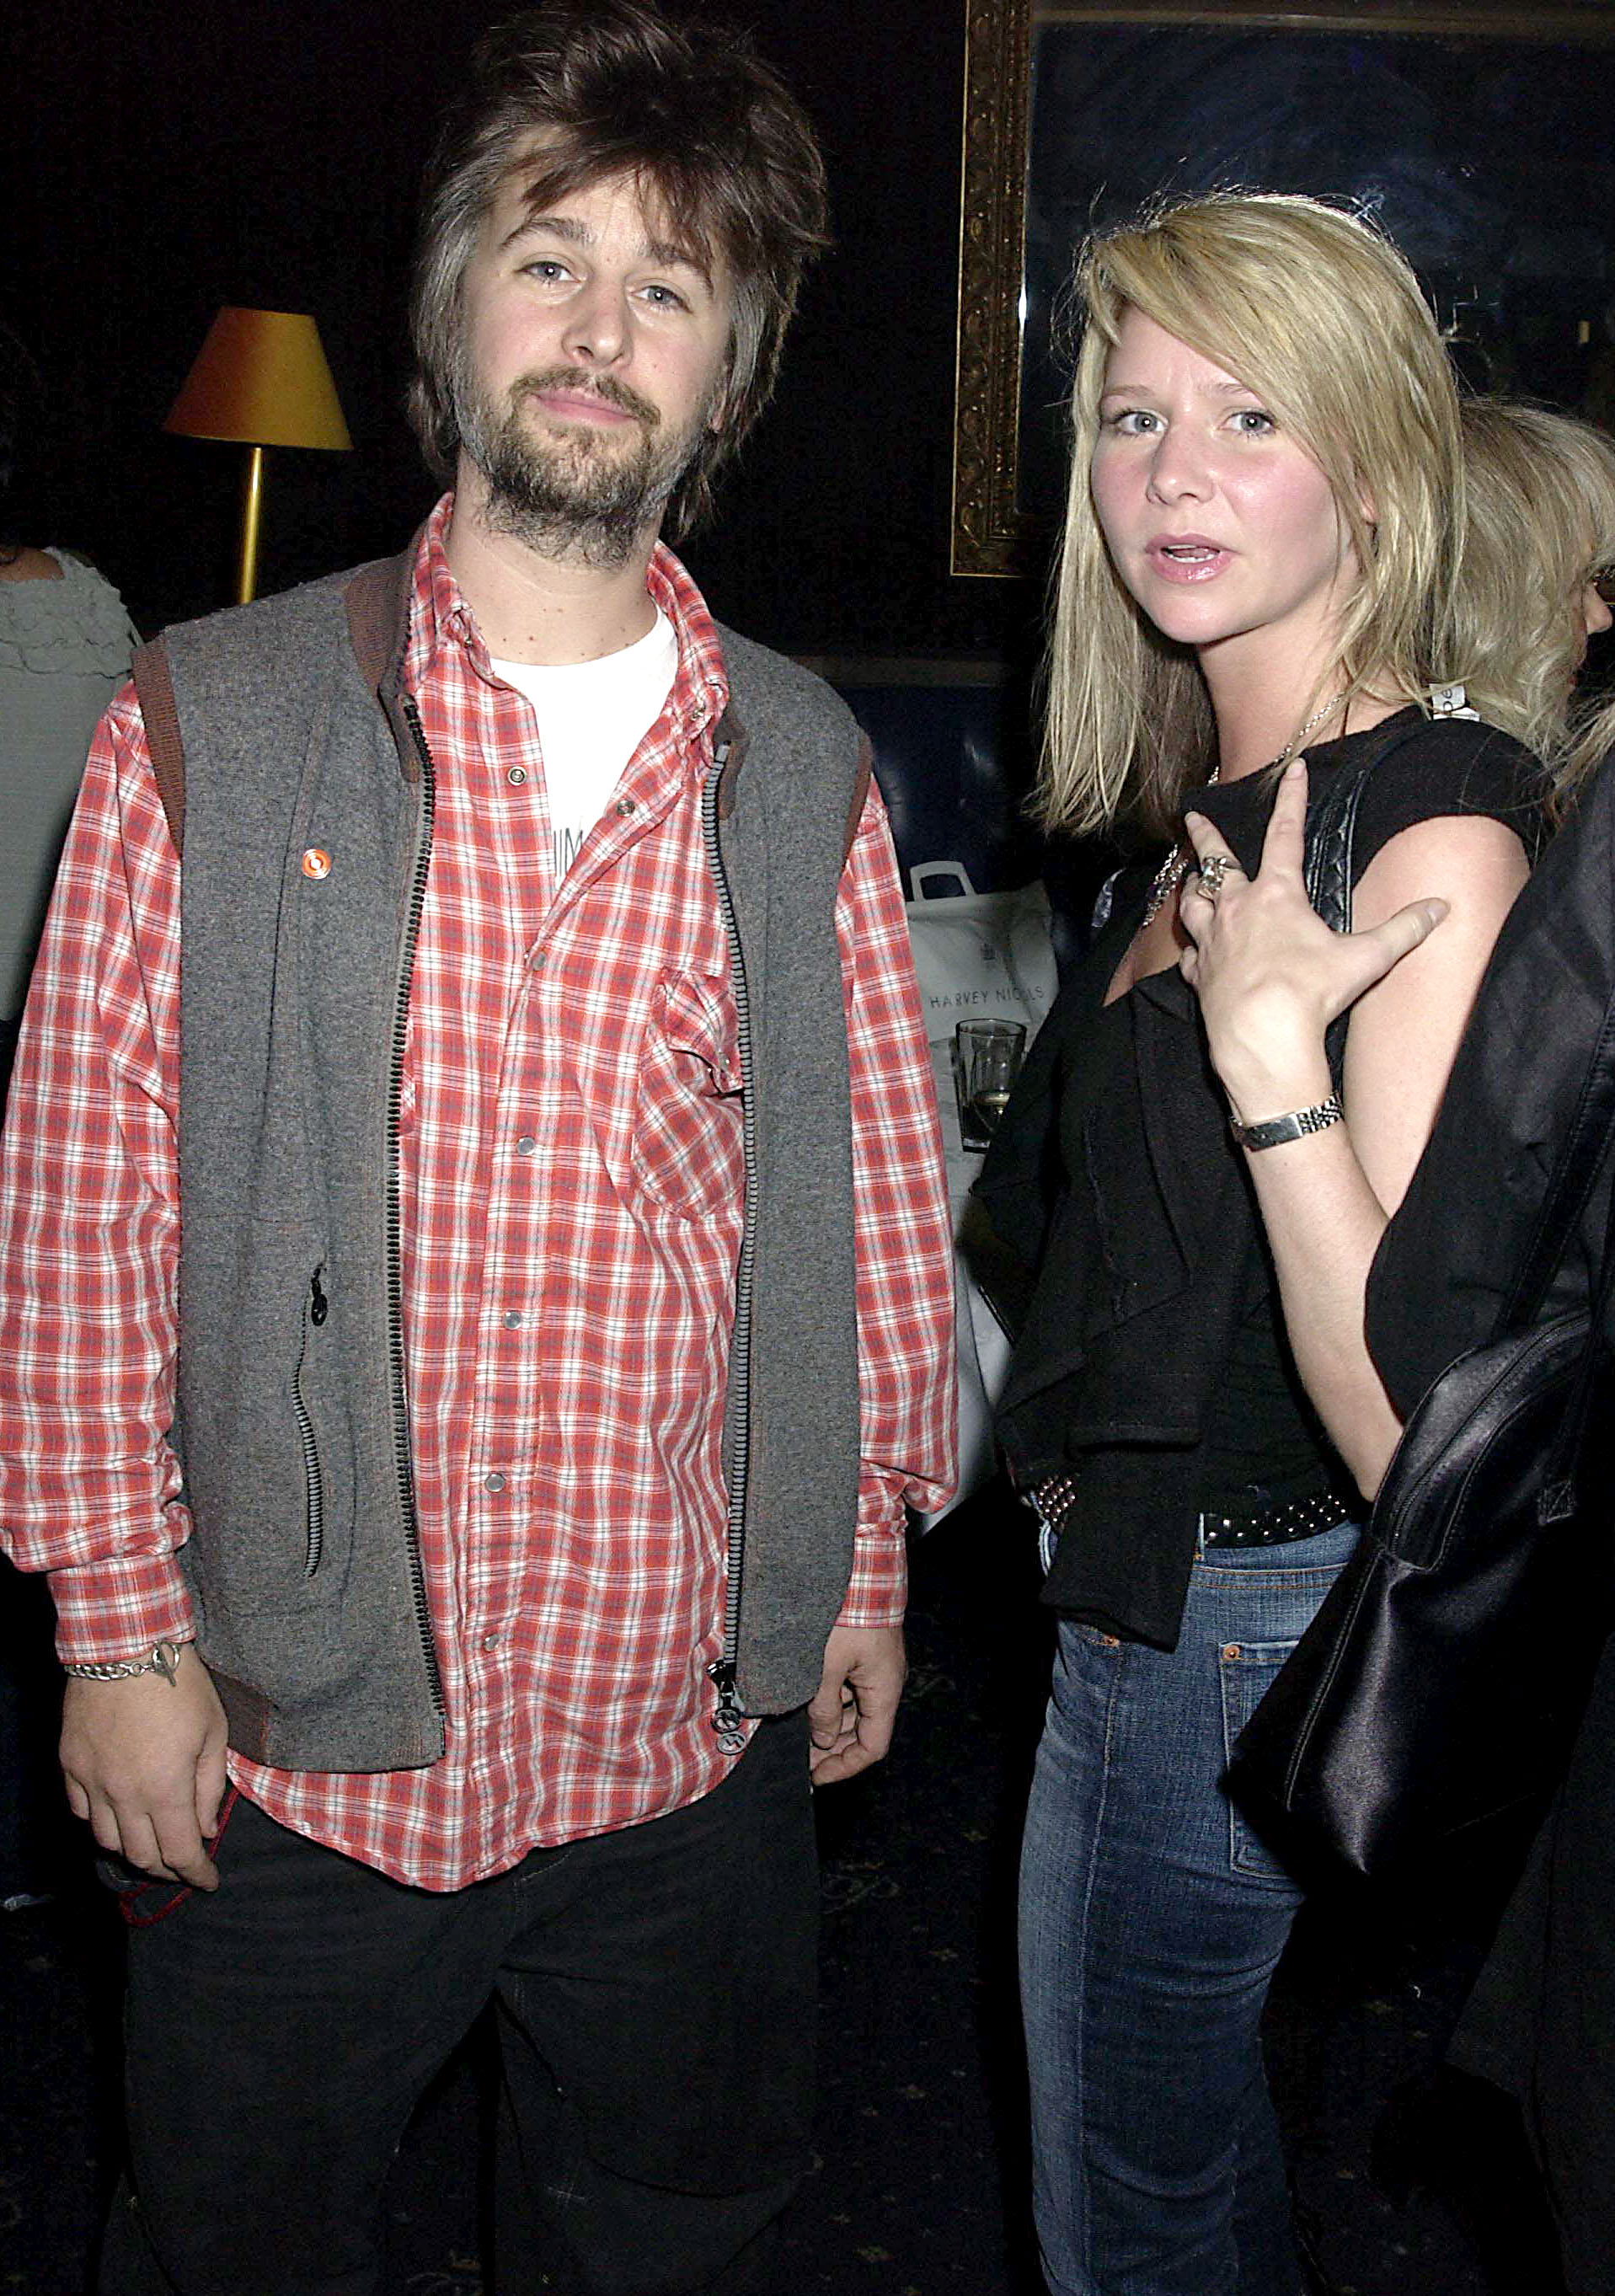 Jason and Lee Starkey at Bill Wyman's Book "Rolling With The Stones" Launch Party in London on October 21, 2002 | Source: Getty Images